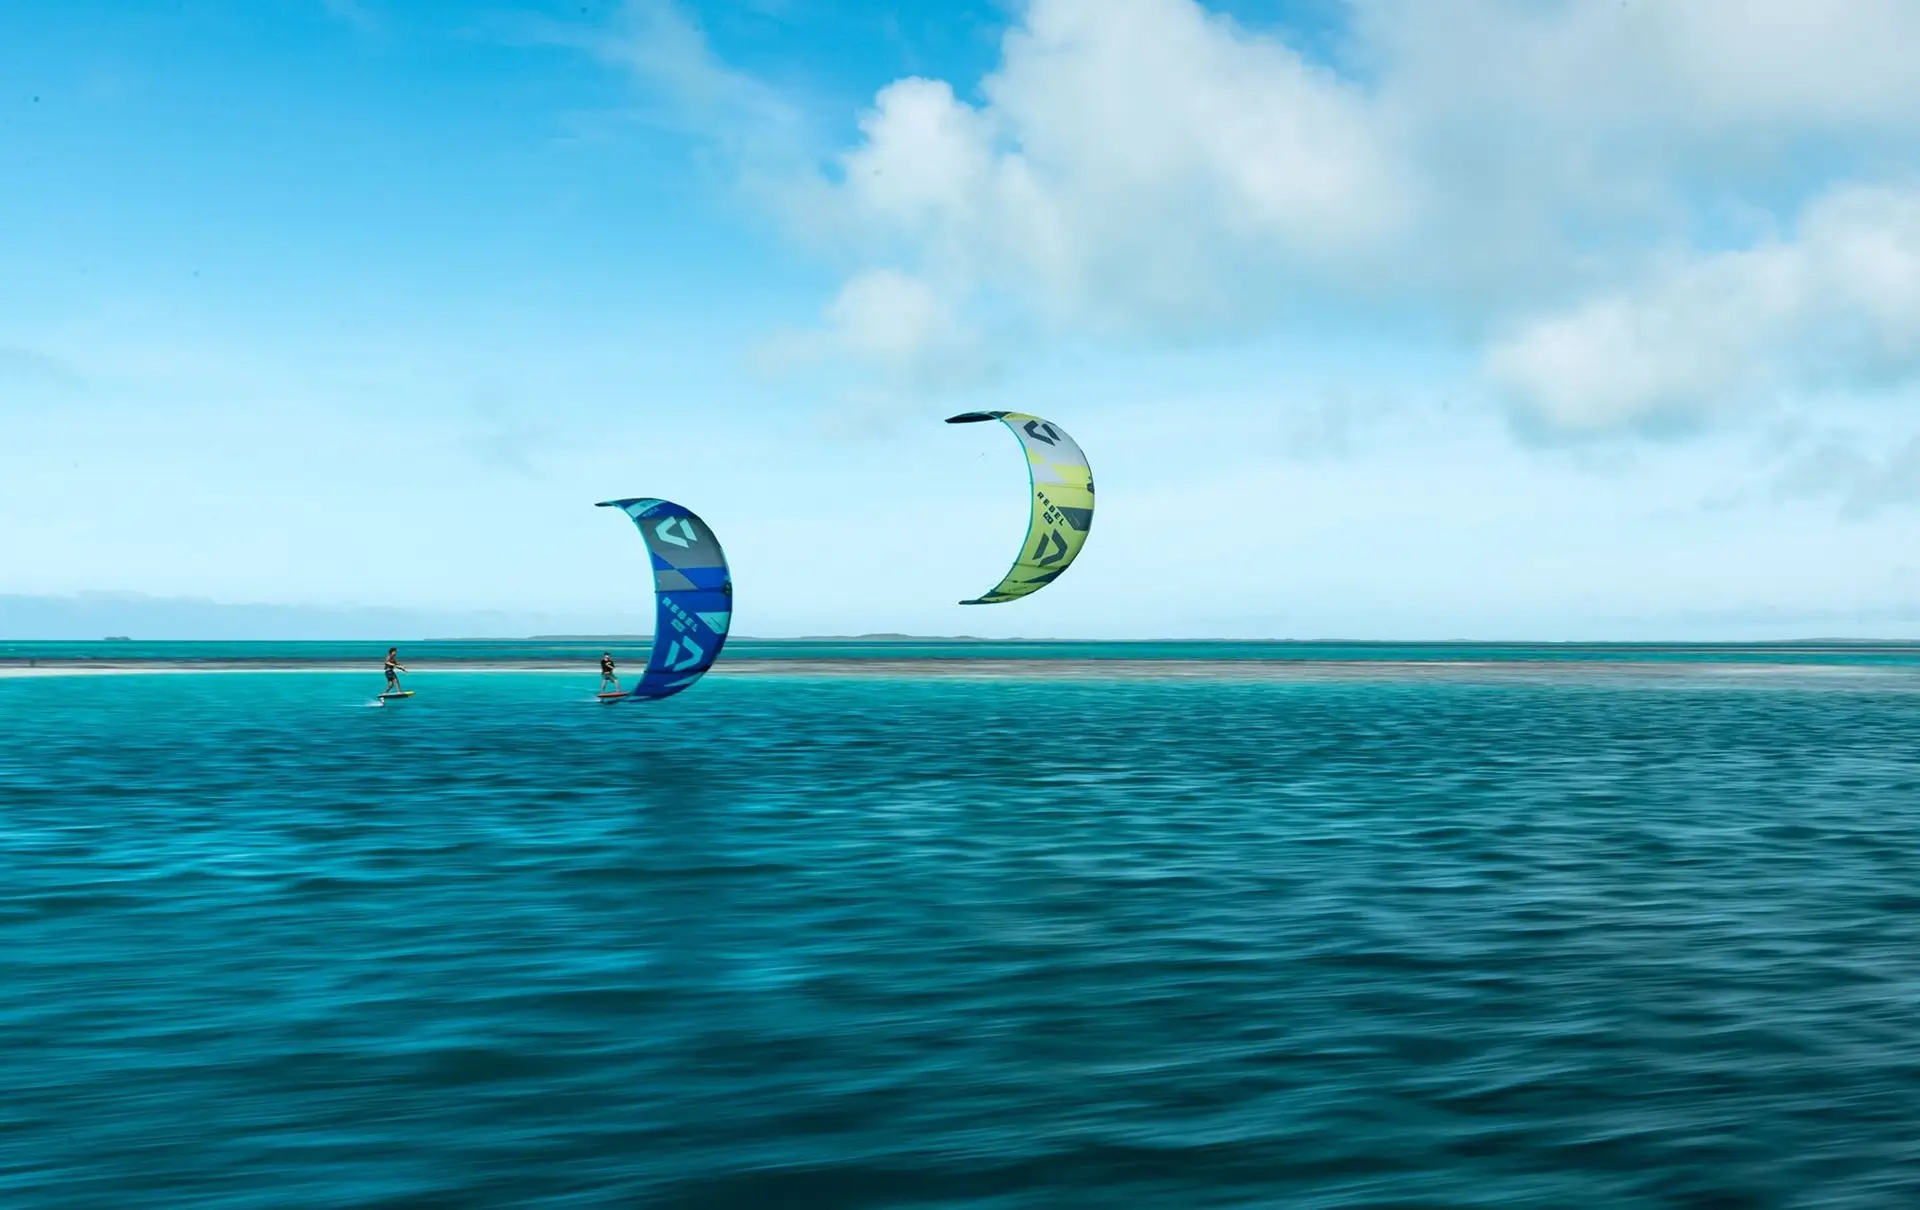 two kiter flying over blue water